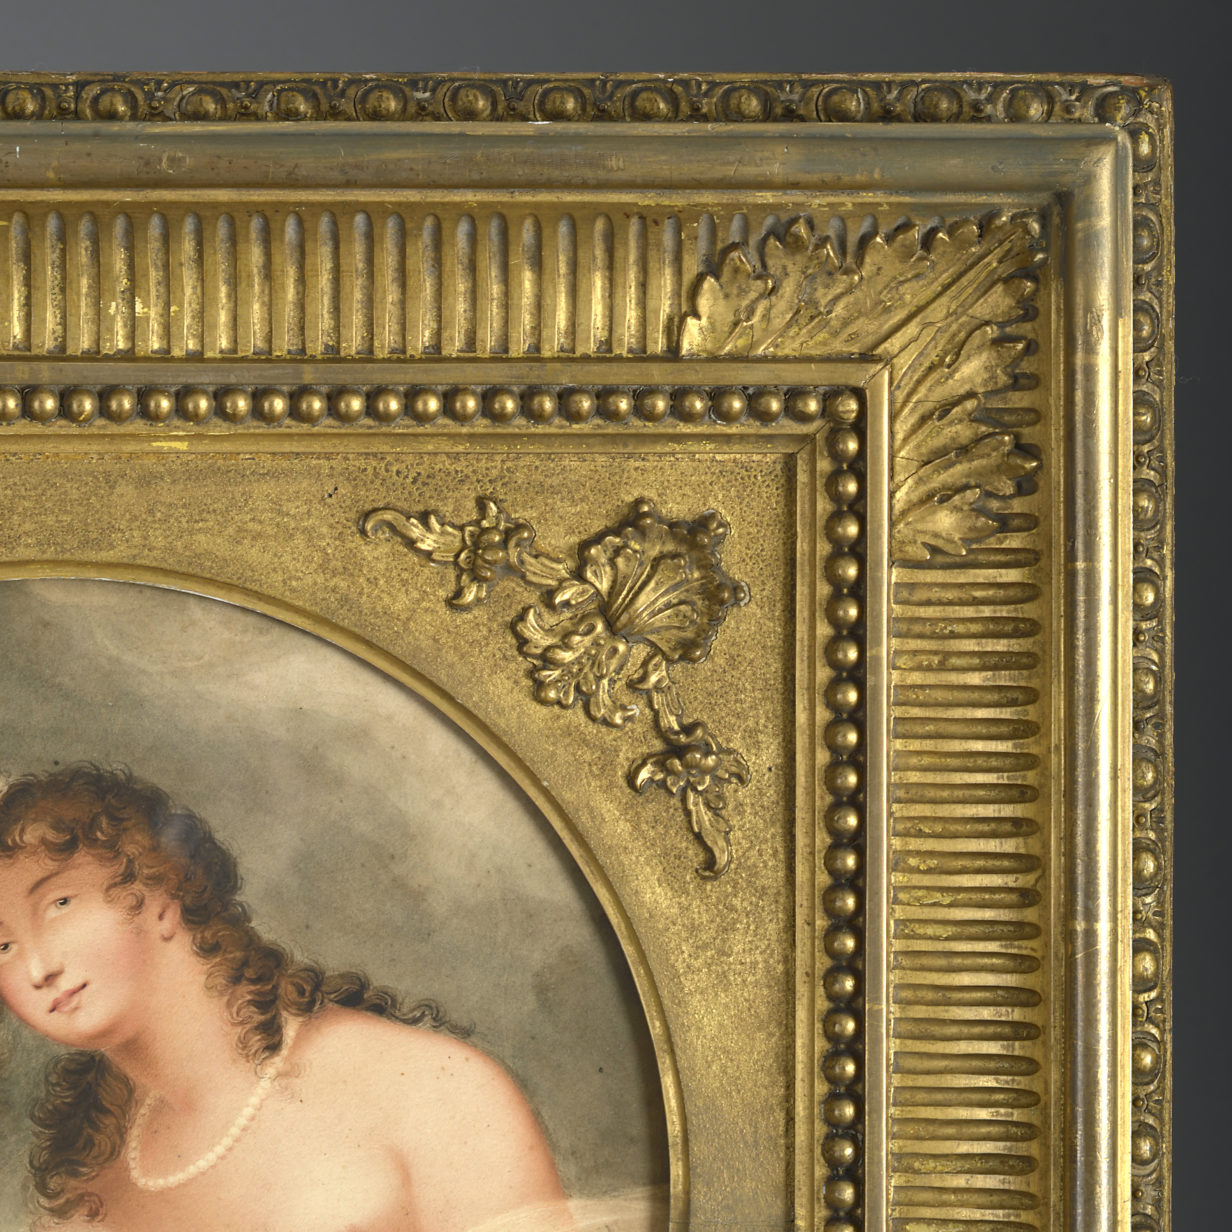 Early 19th century pastel depicting the goddess hebe